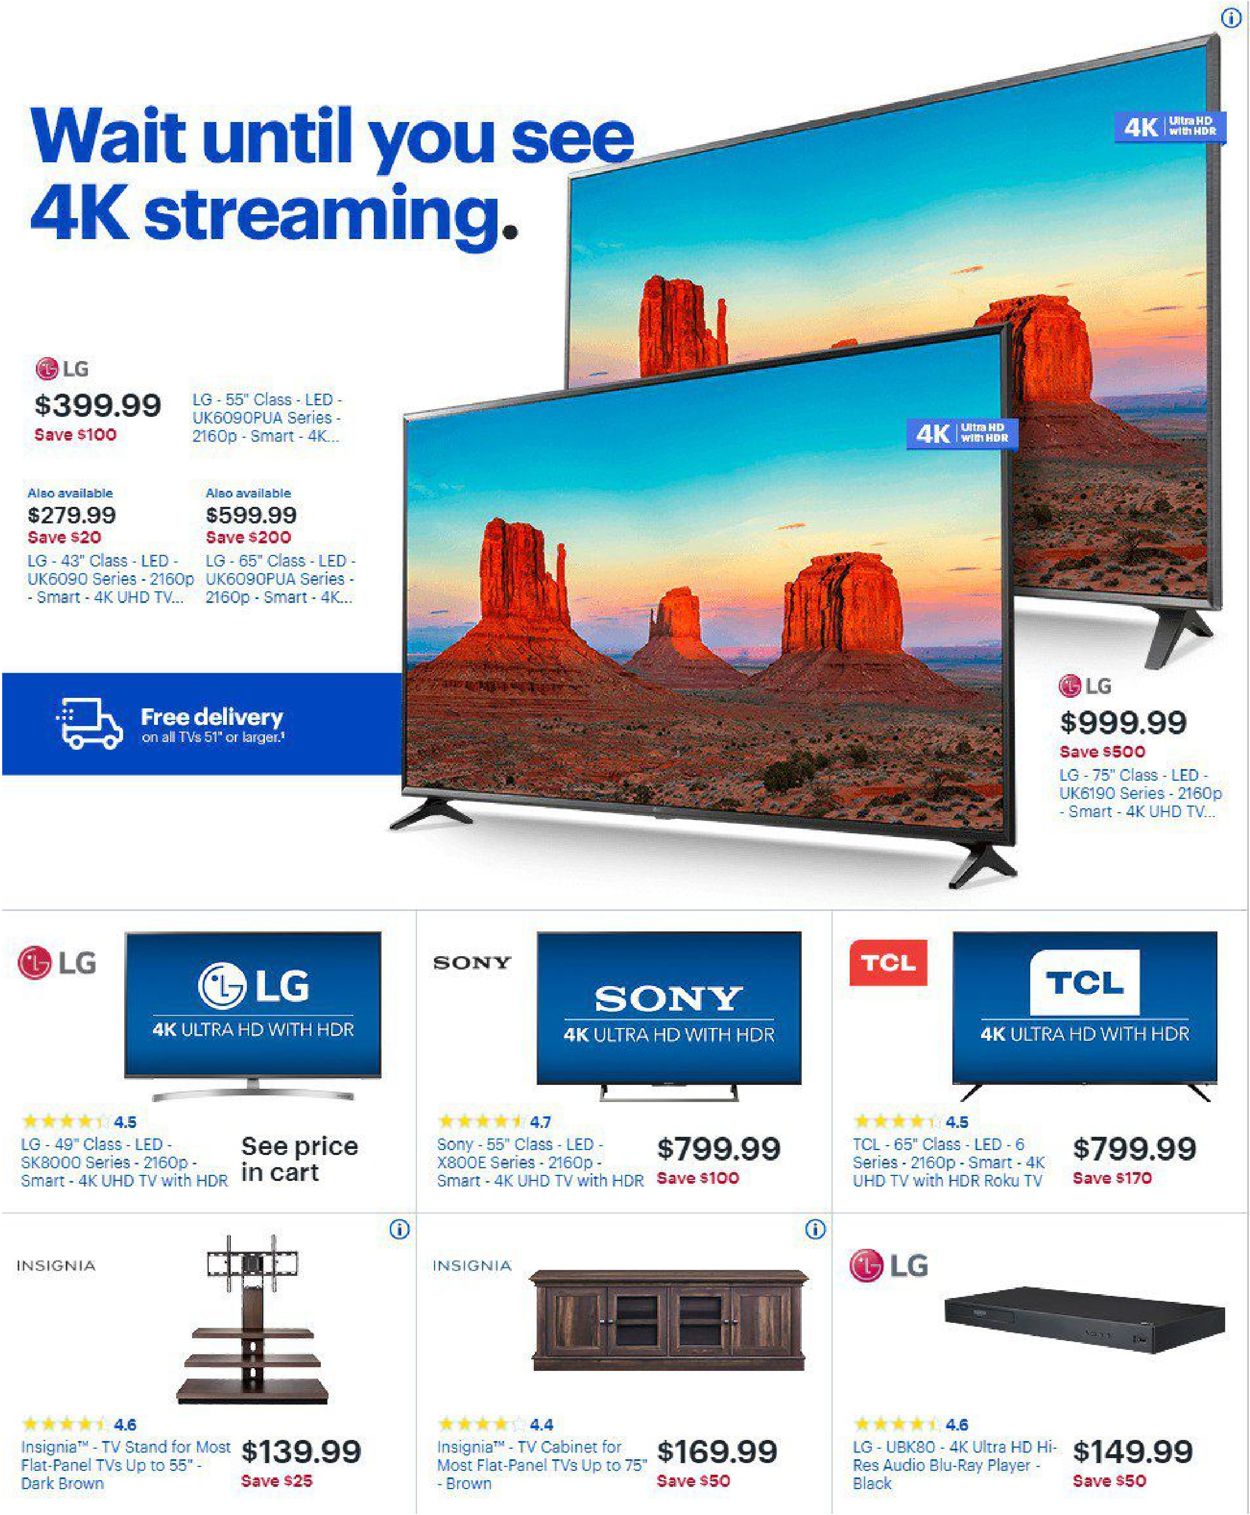 Best Buy Current weekly ad 04/28 - 05/04/2019 [6] - frequent-ads.com